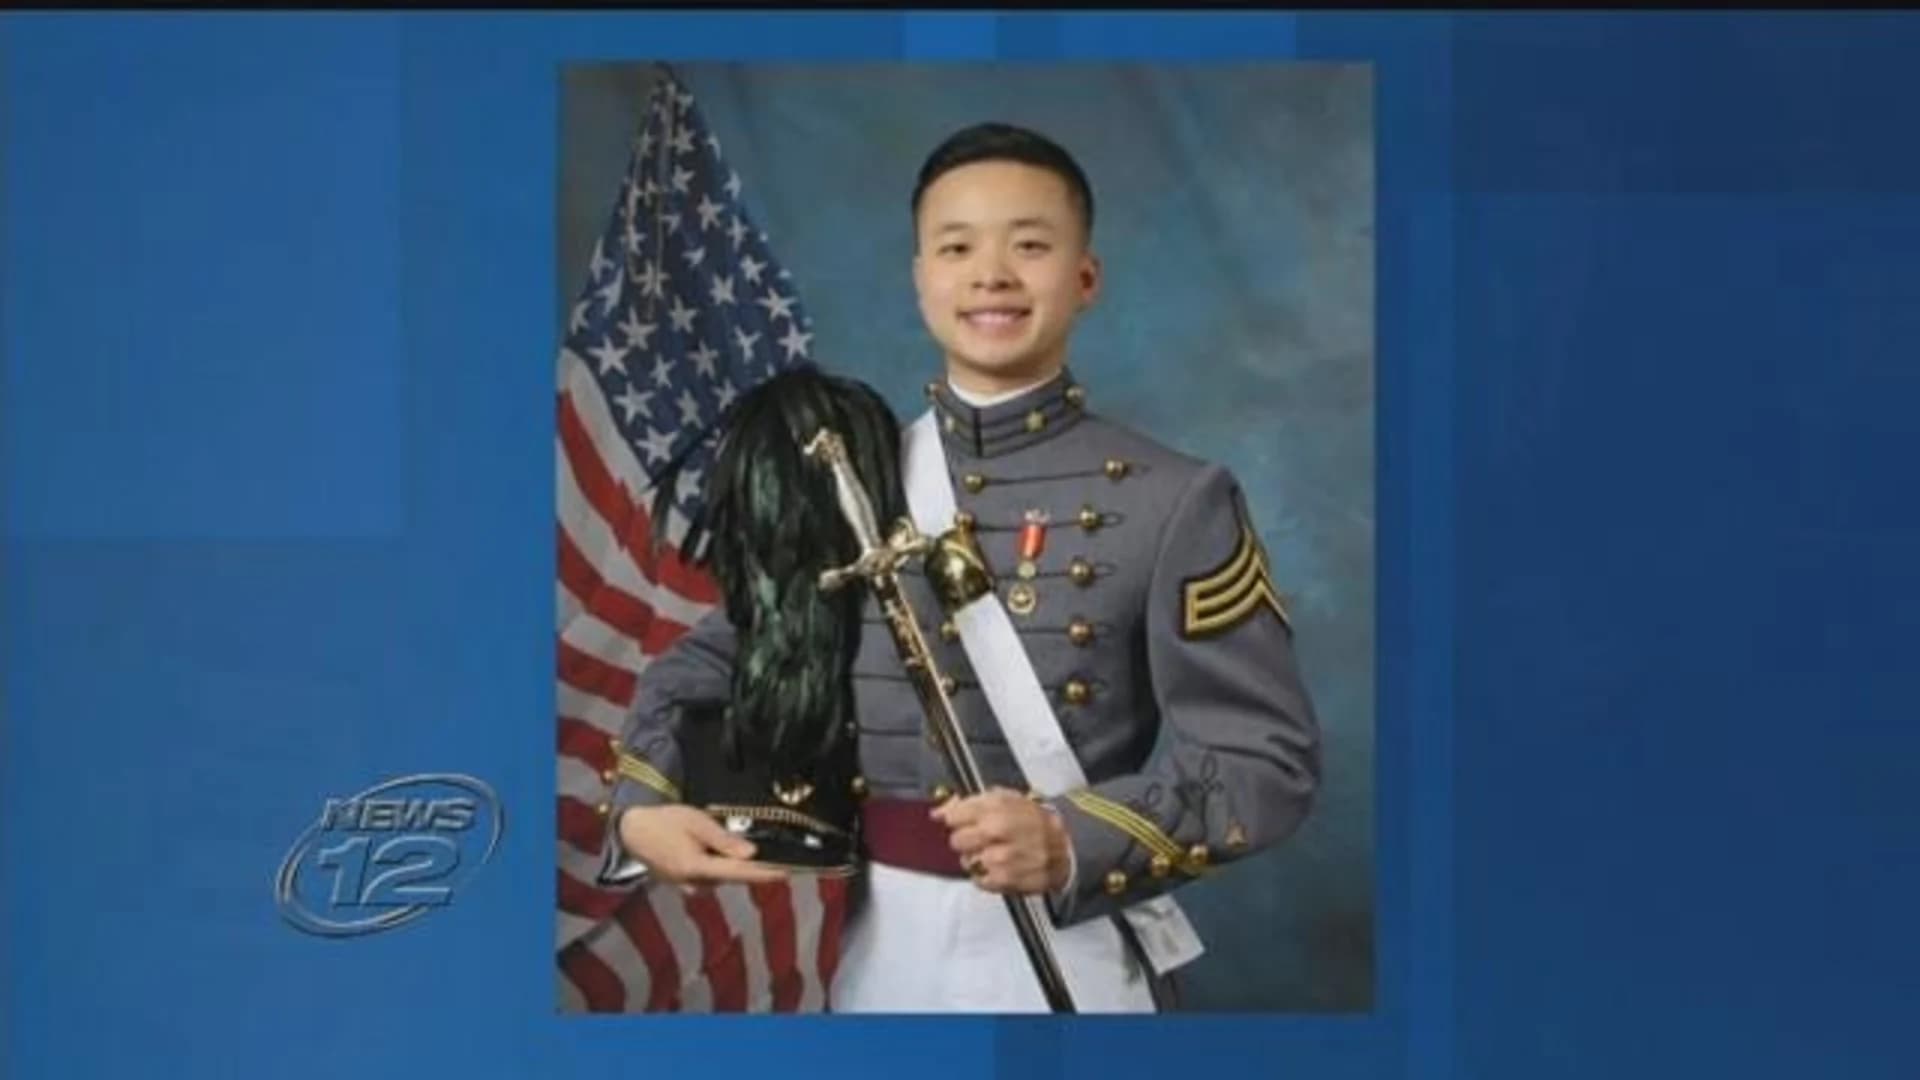 West Point cadet dies of injuries from skiing accident